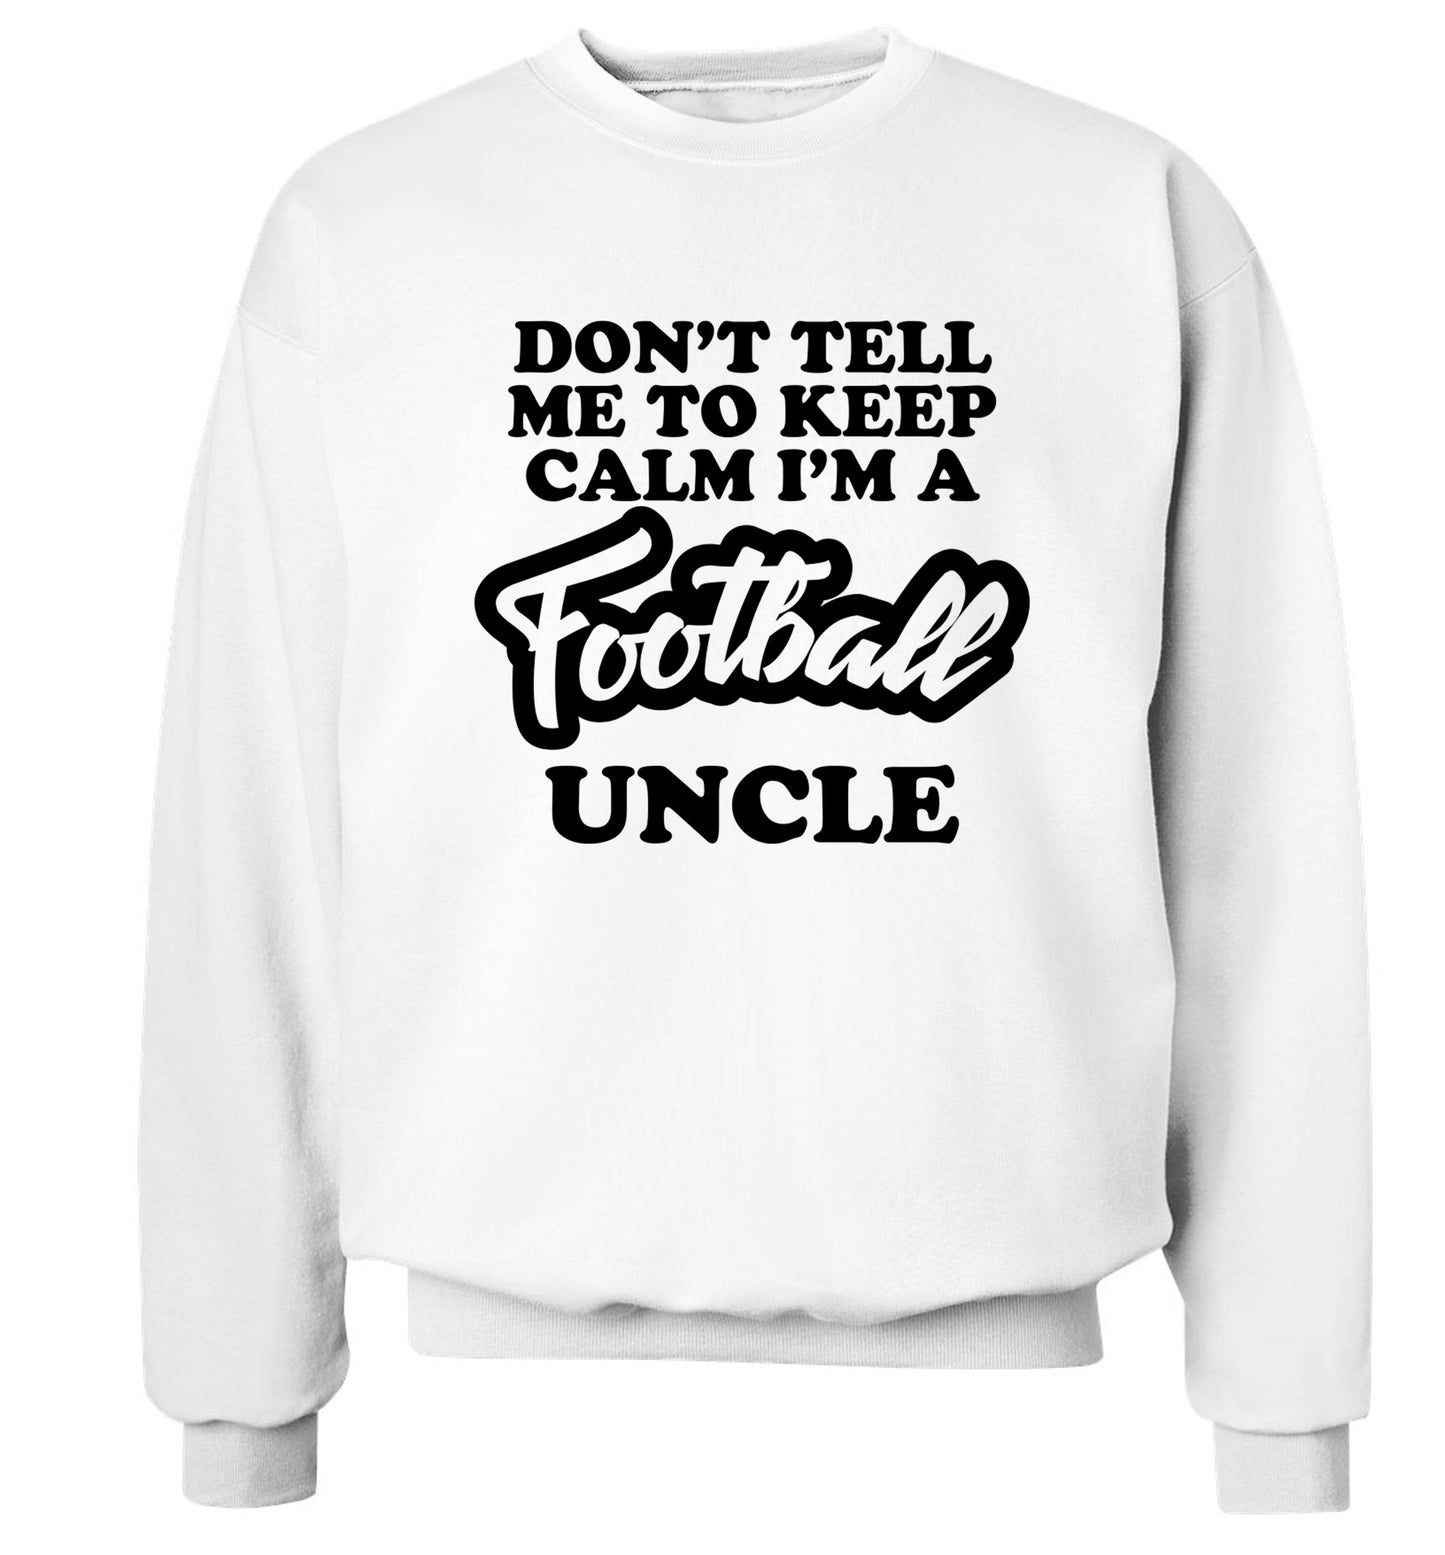 Don't tell me to keep calm I'm a football uncle Adult's unisexwhite Sweater 2XL